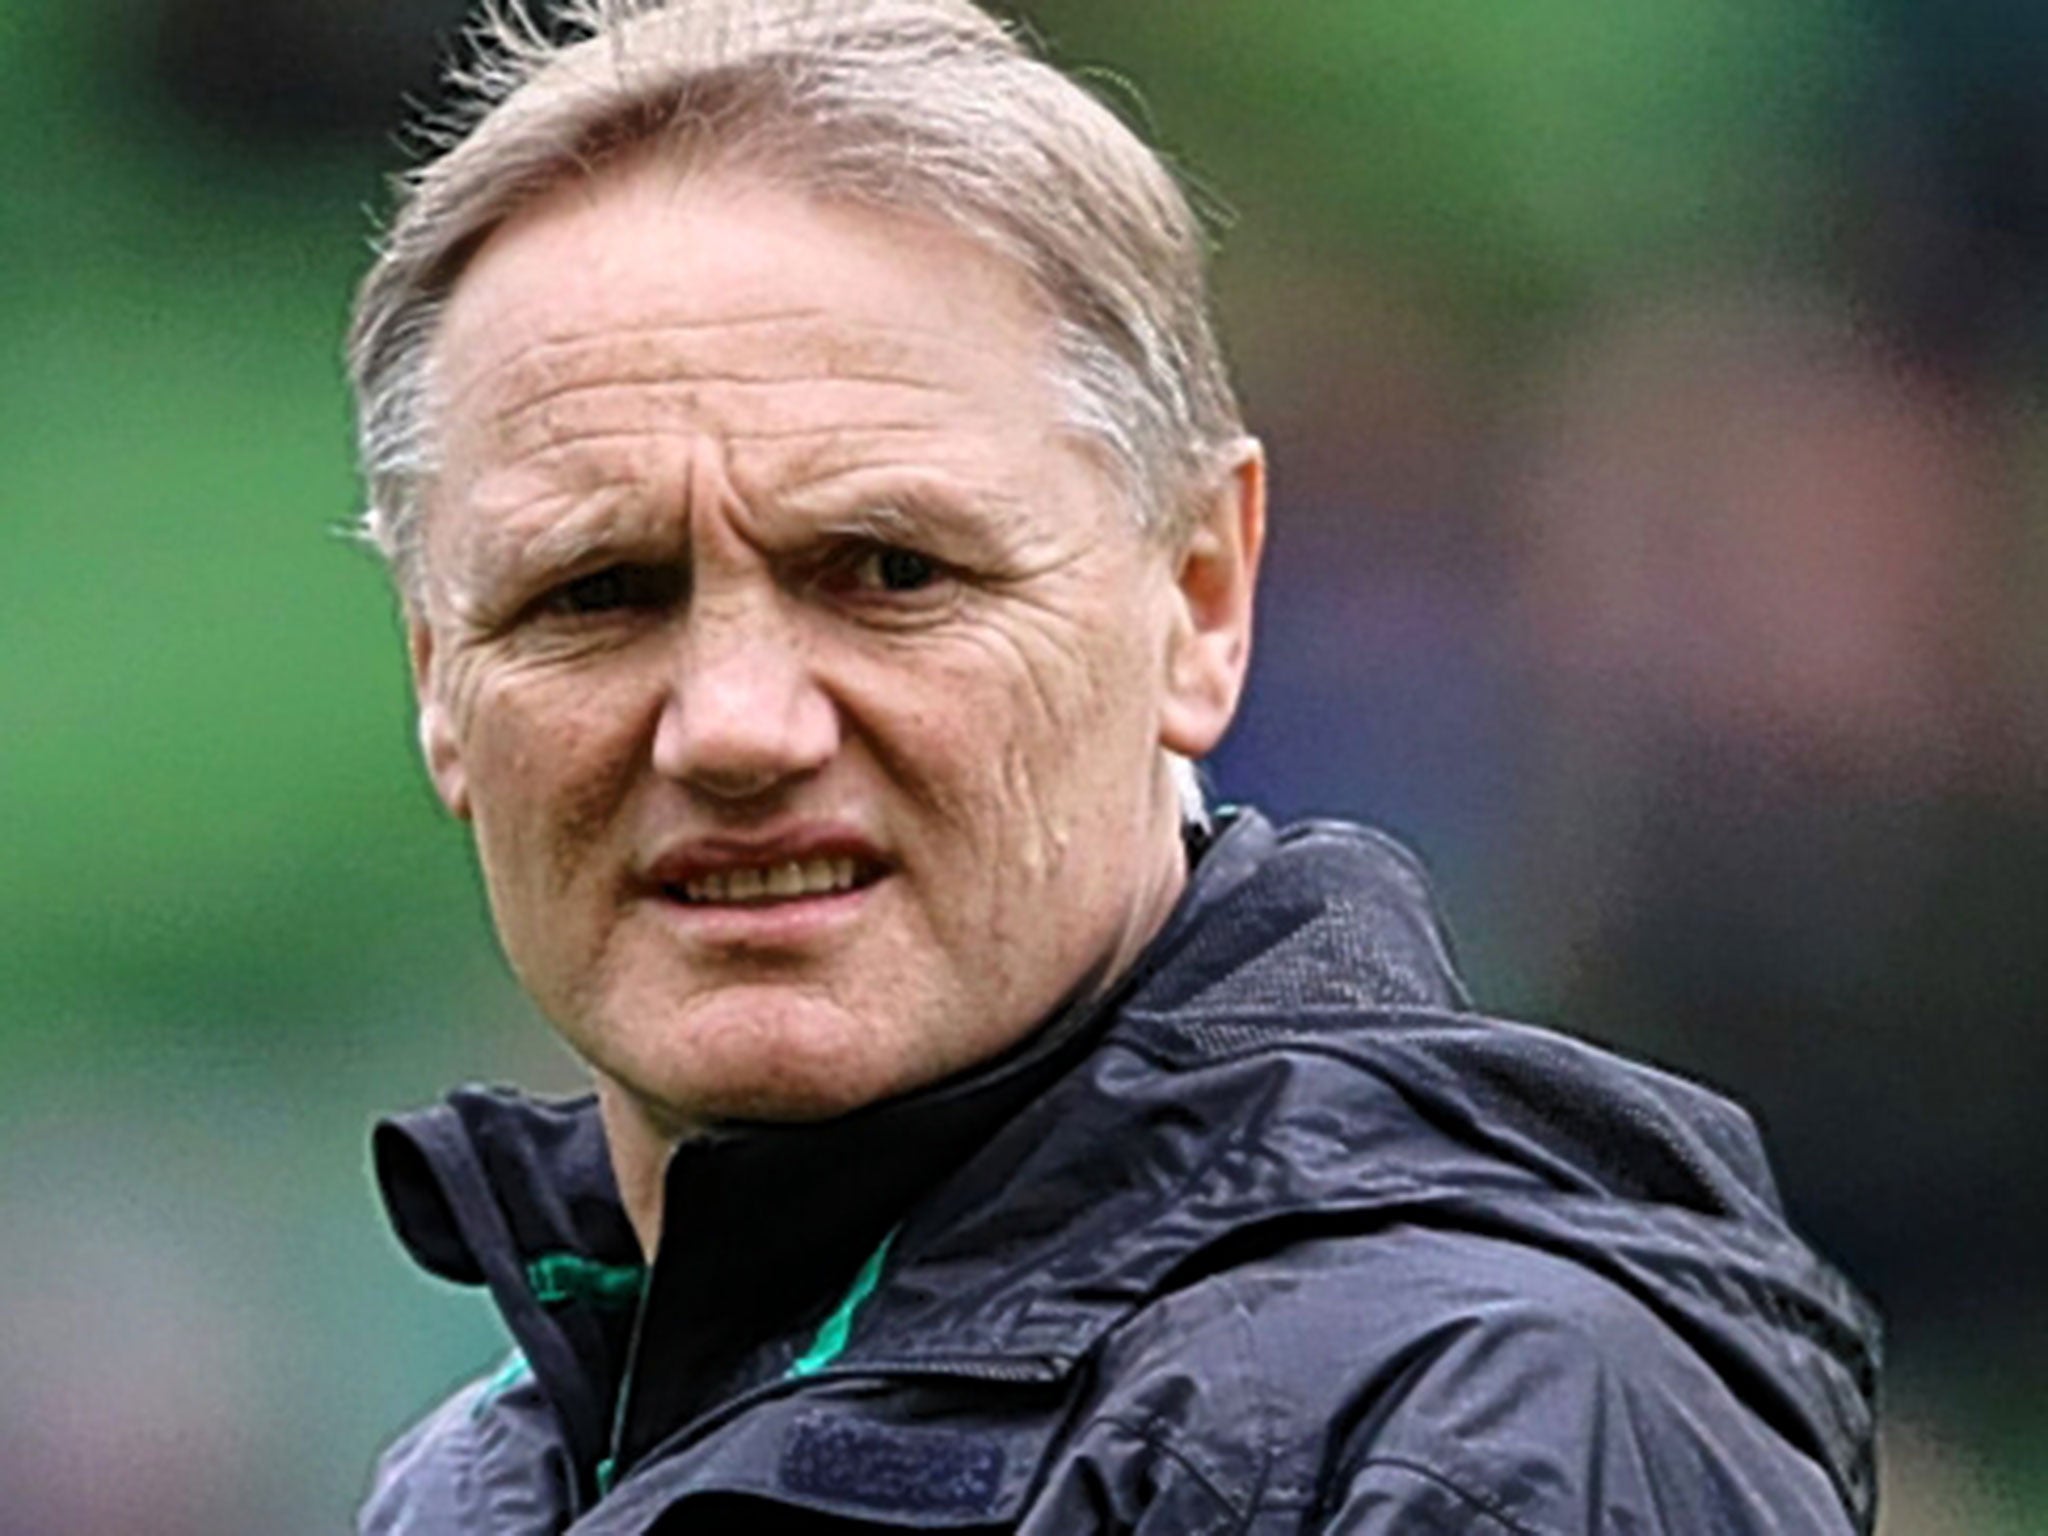 Joe Schmidt's narrowly focused approach has given his Ireland side an ambitious look